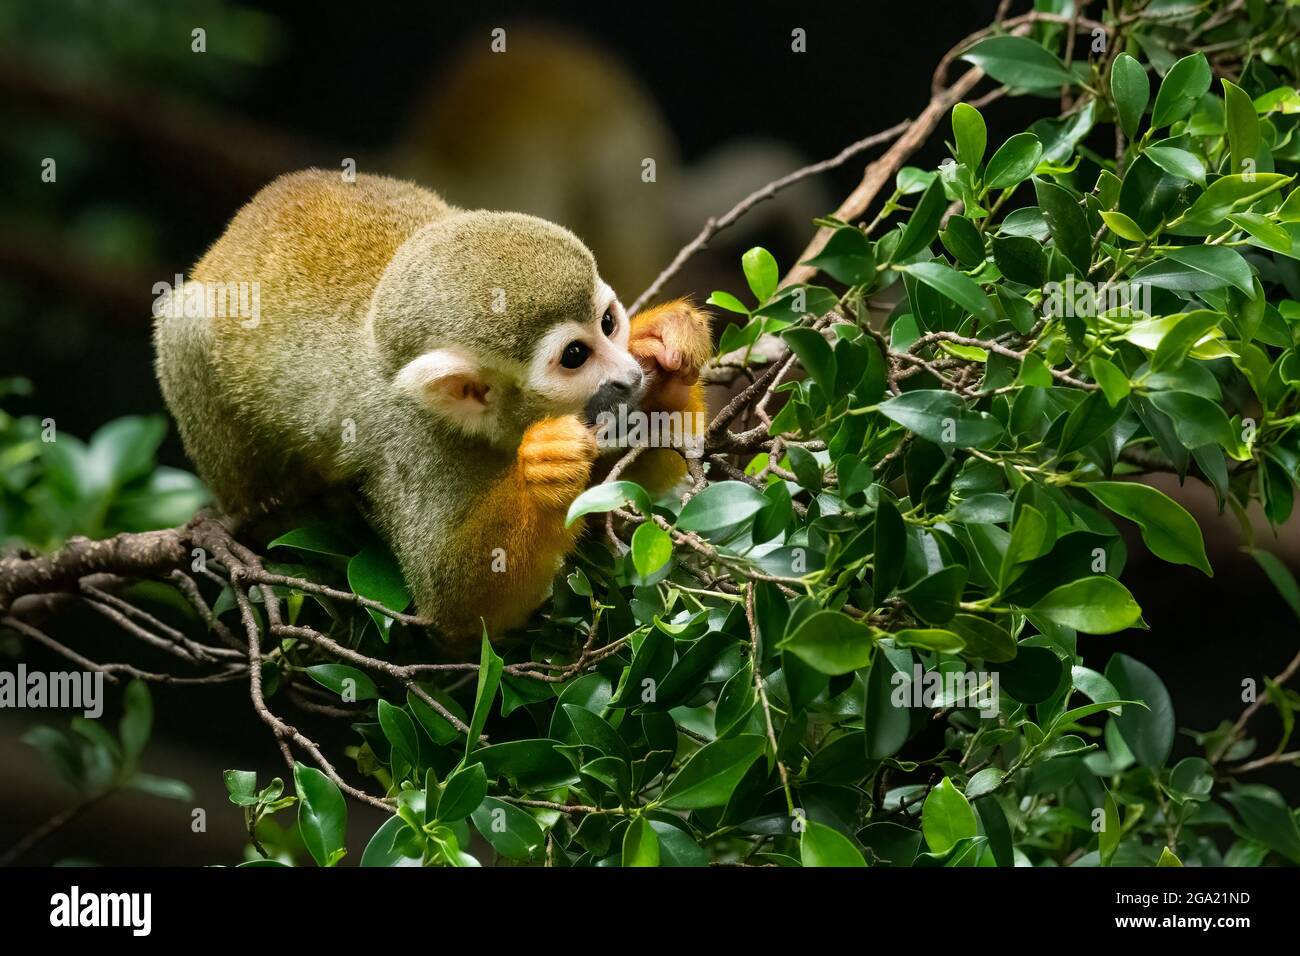 Common Squirrel Monkey biting tree branch looking into a distance Stock Photo